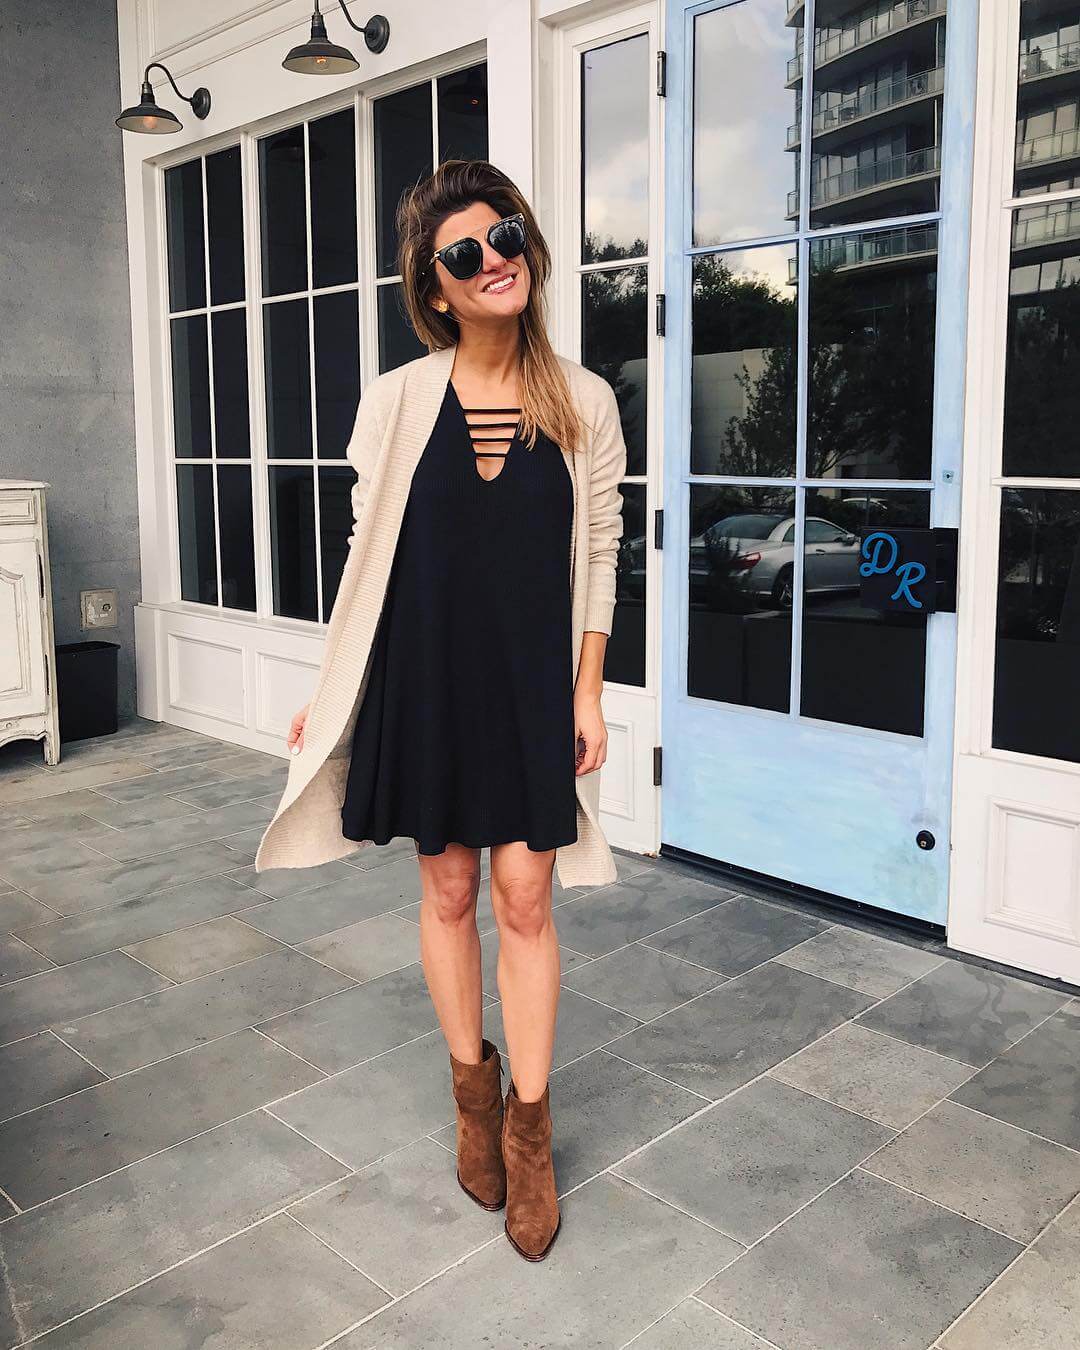 lush strappy front dress with cardigan and brown suede booties // fall outfit ideas